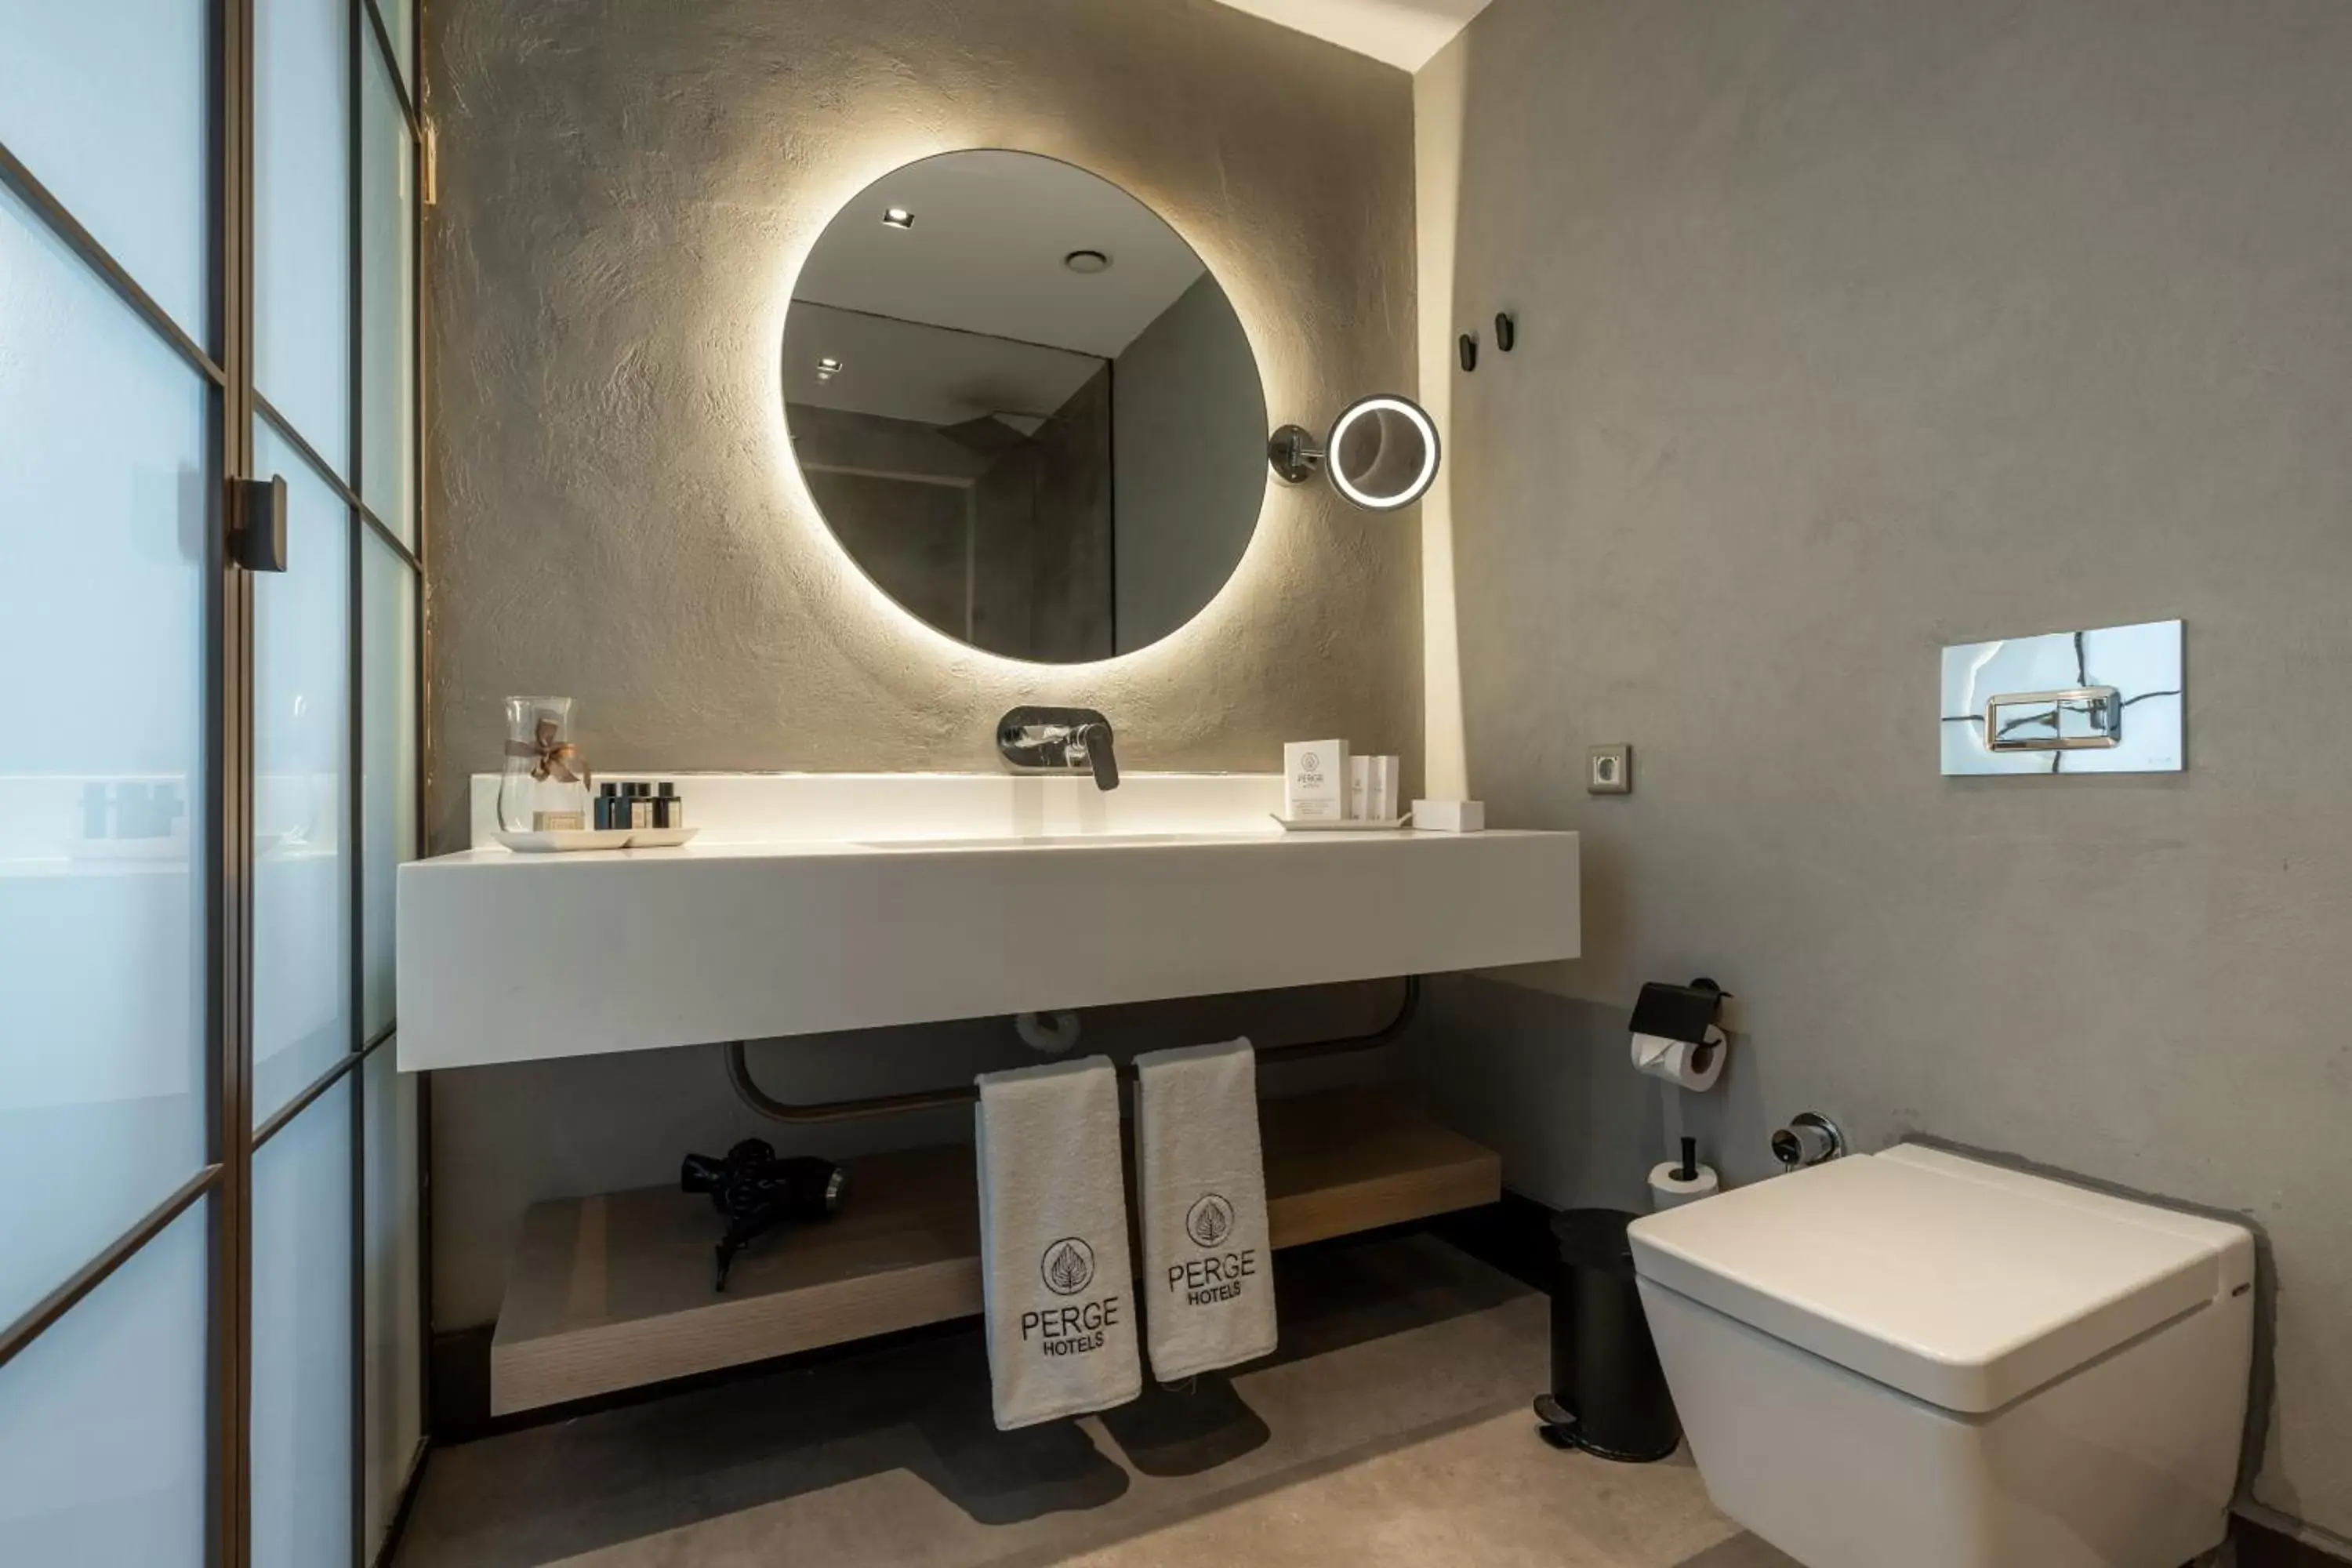 Bathroom in Perge Hotels - Adult Only 18 plus